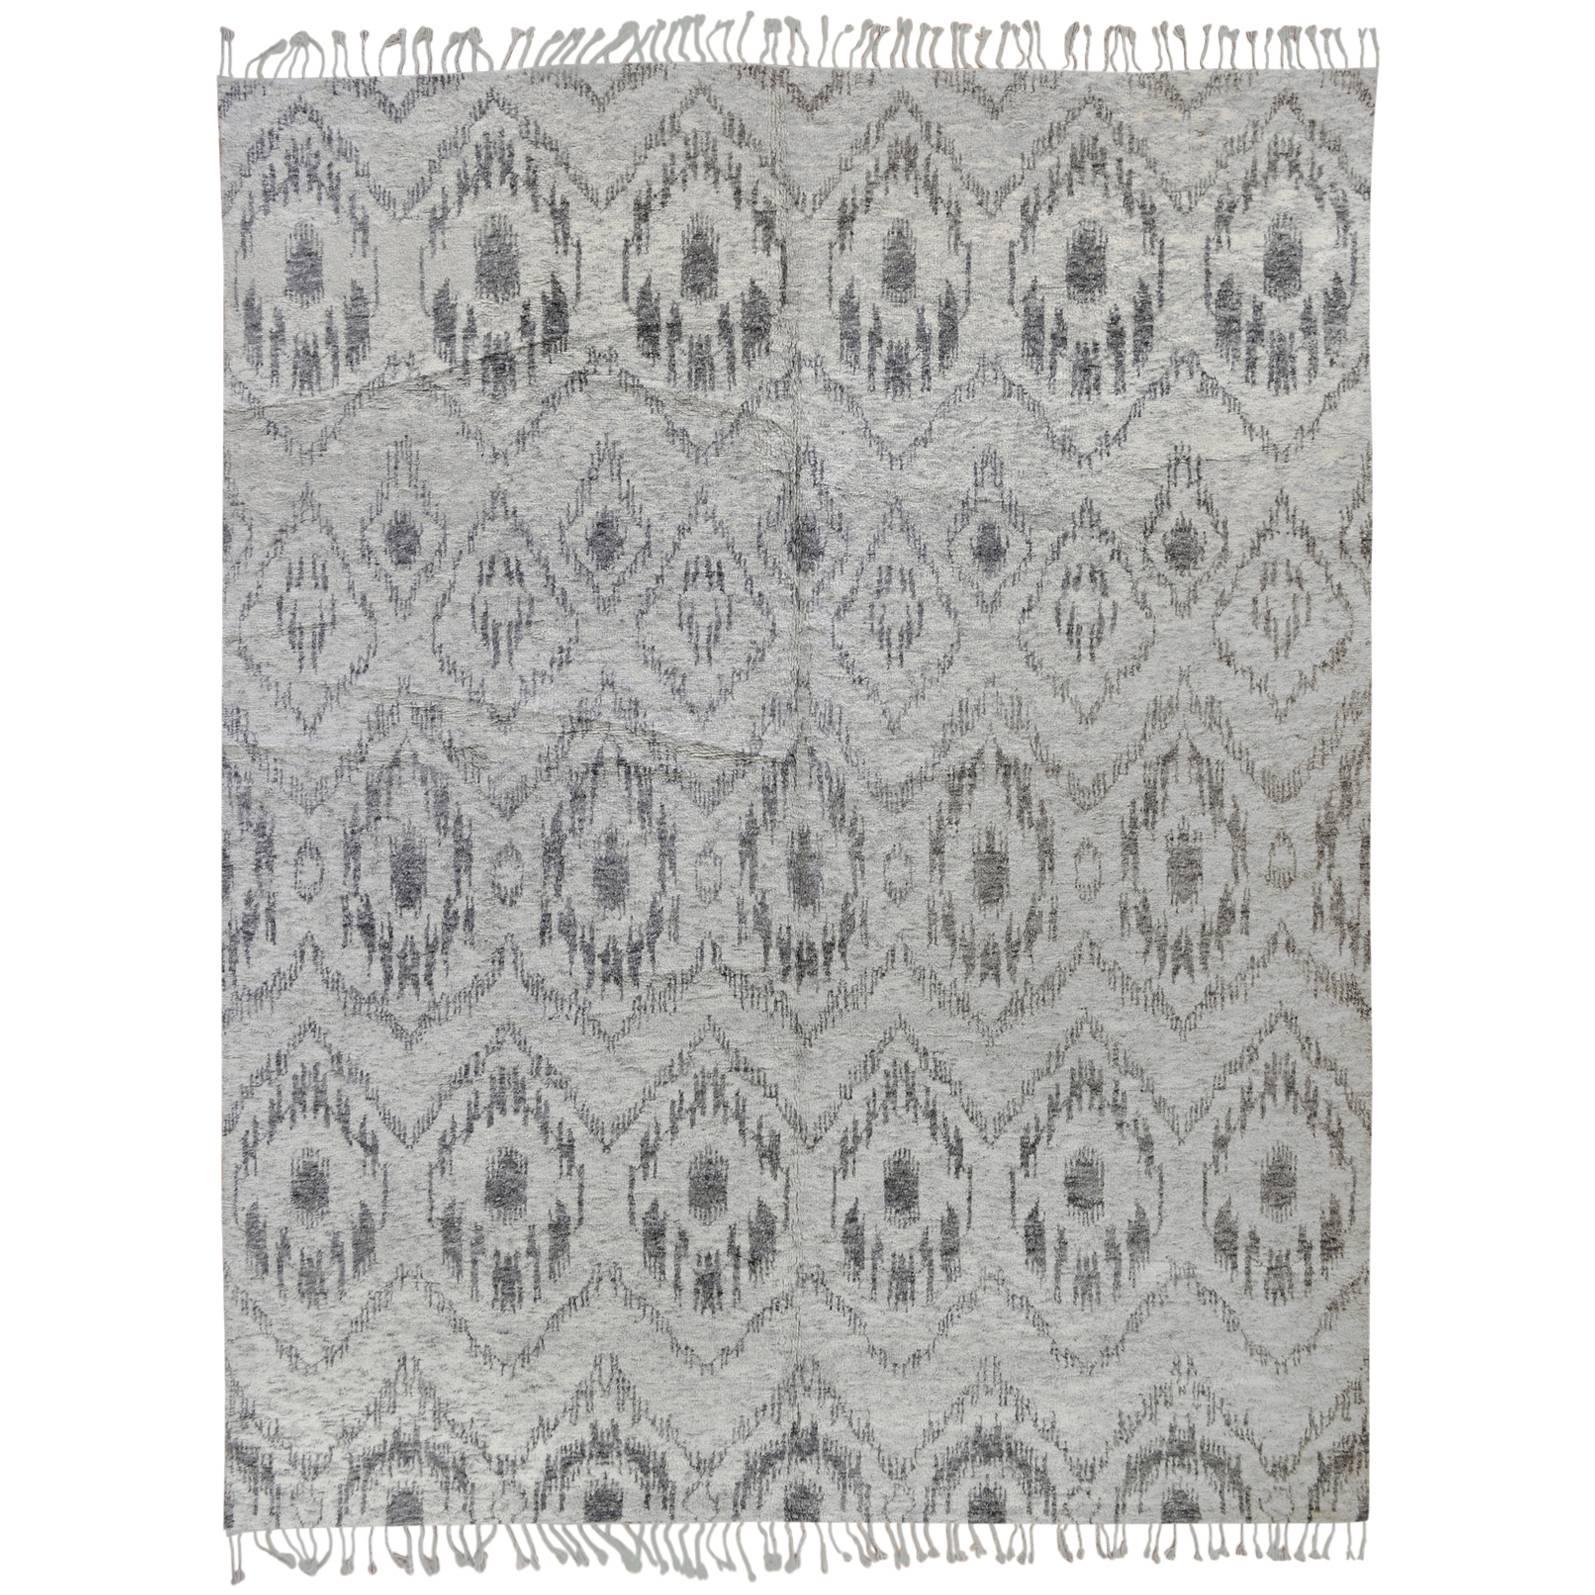 Moroccan Inspired Area Rug